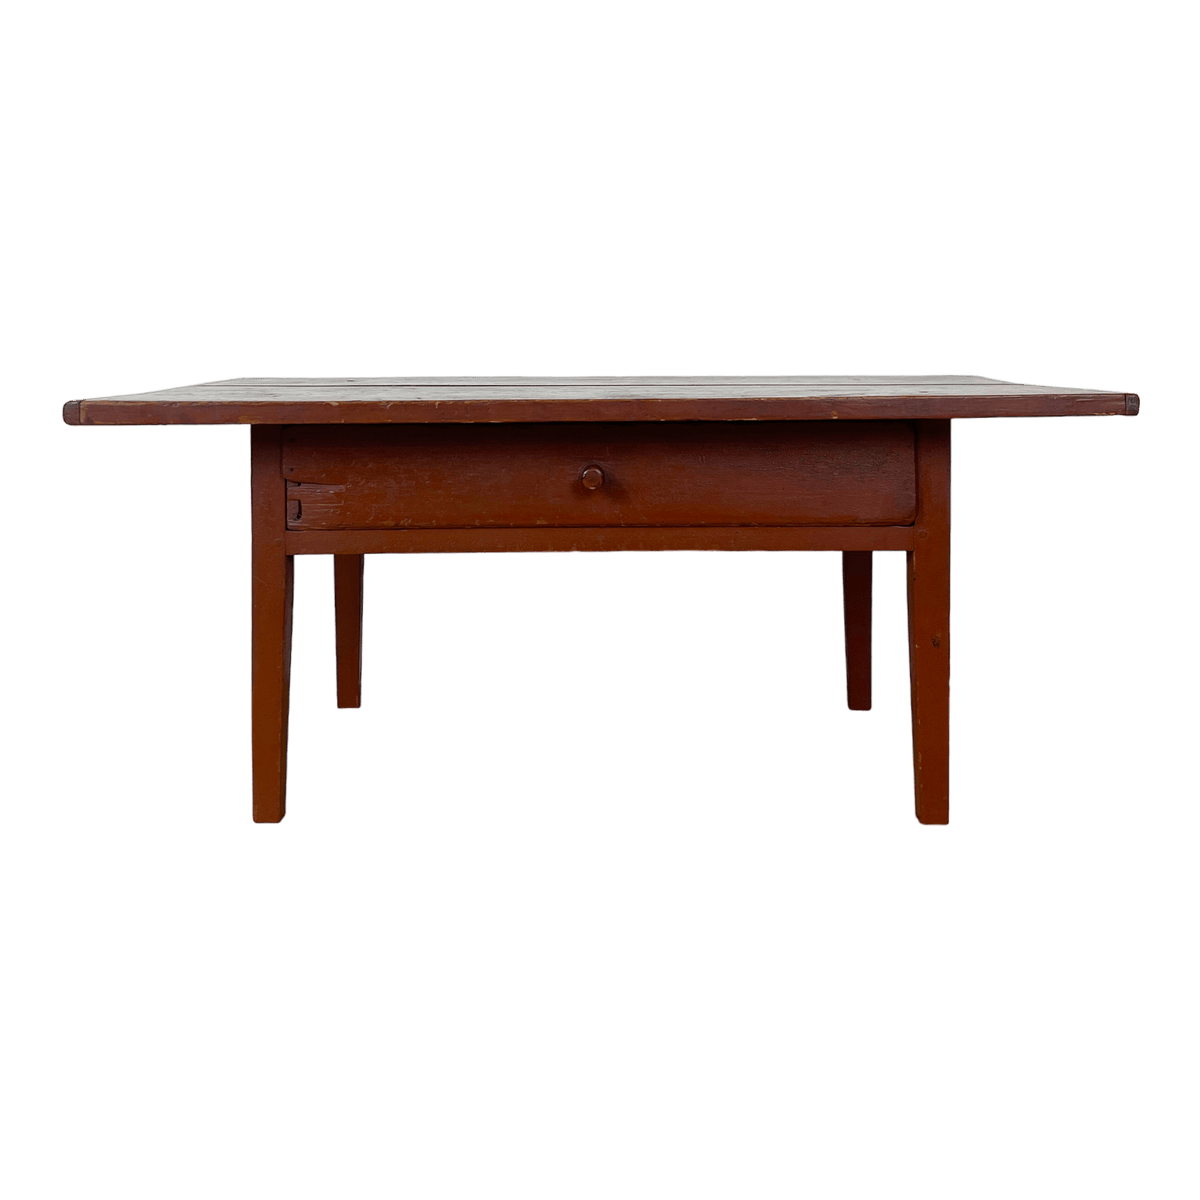 Early American Cocktail Table